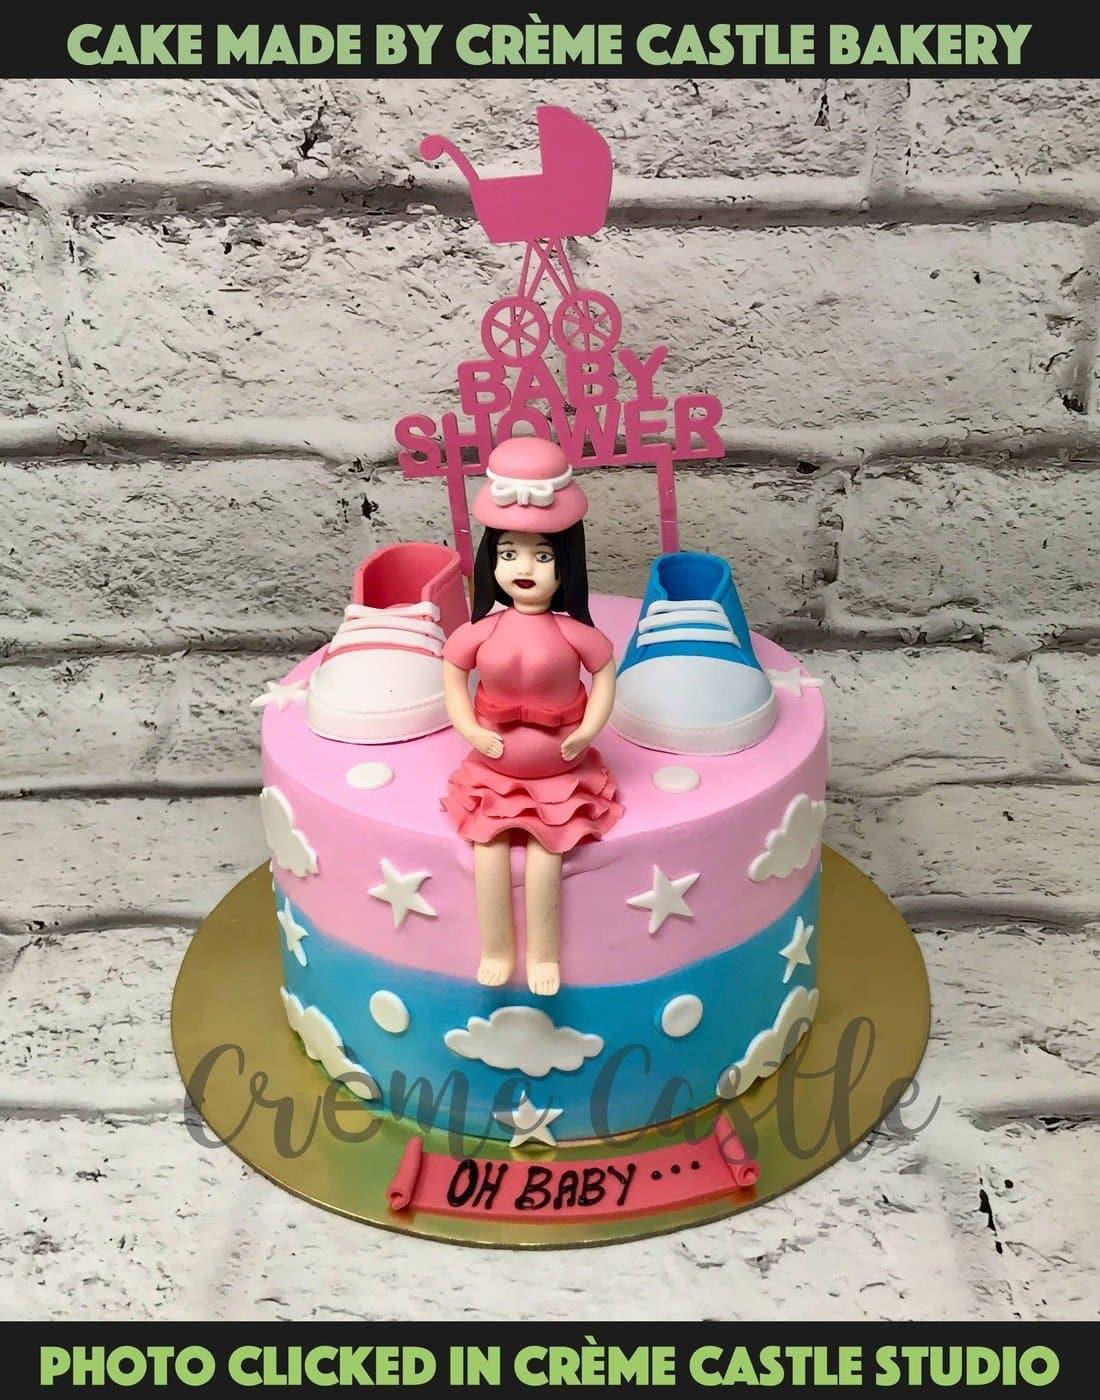 Pregnant woman cake Archives - Bakers and Artists | The Daily Gourmet Food  and Product CataBlog | Trends | Packaging | Hampers | Cupcakes | Cakes |  Cookies | Chocolate | Pasta | Sweet & Savory | Kitchen Products